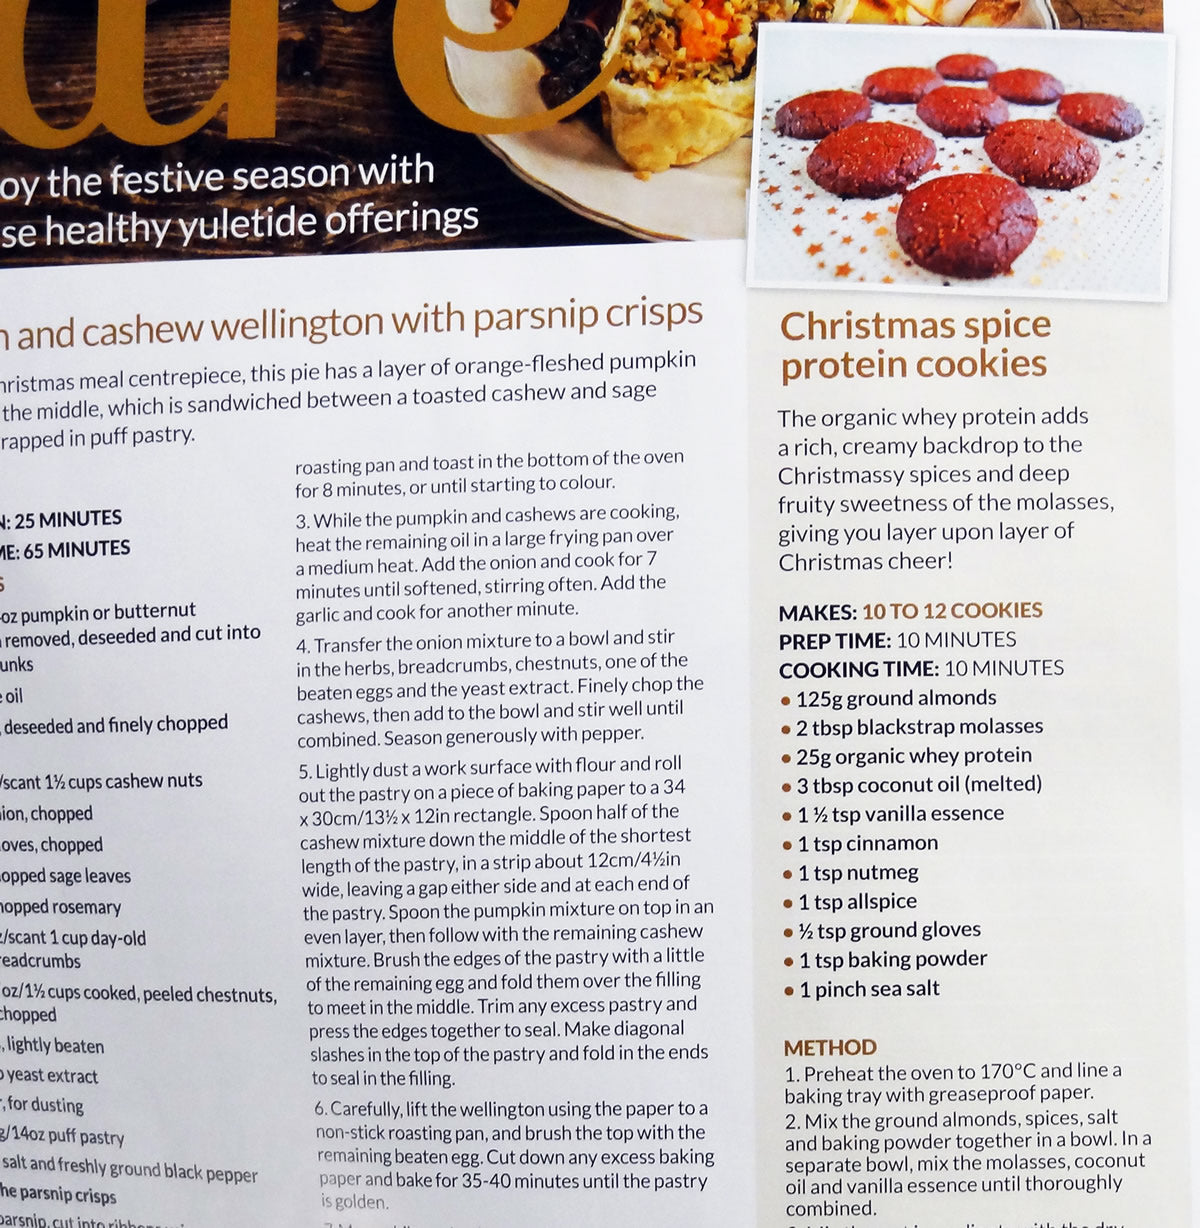 Christmas Spice Protein Cookies in Your Healthy Living Magazine